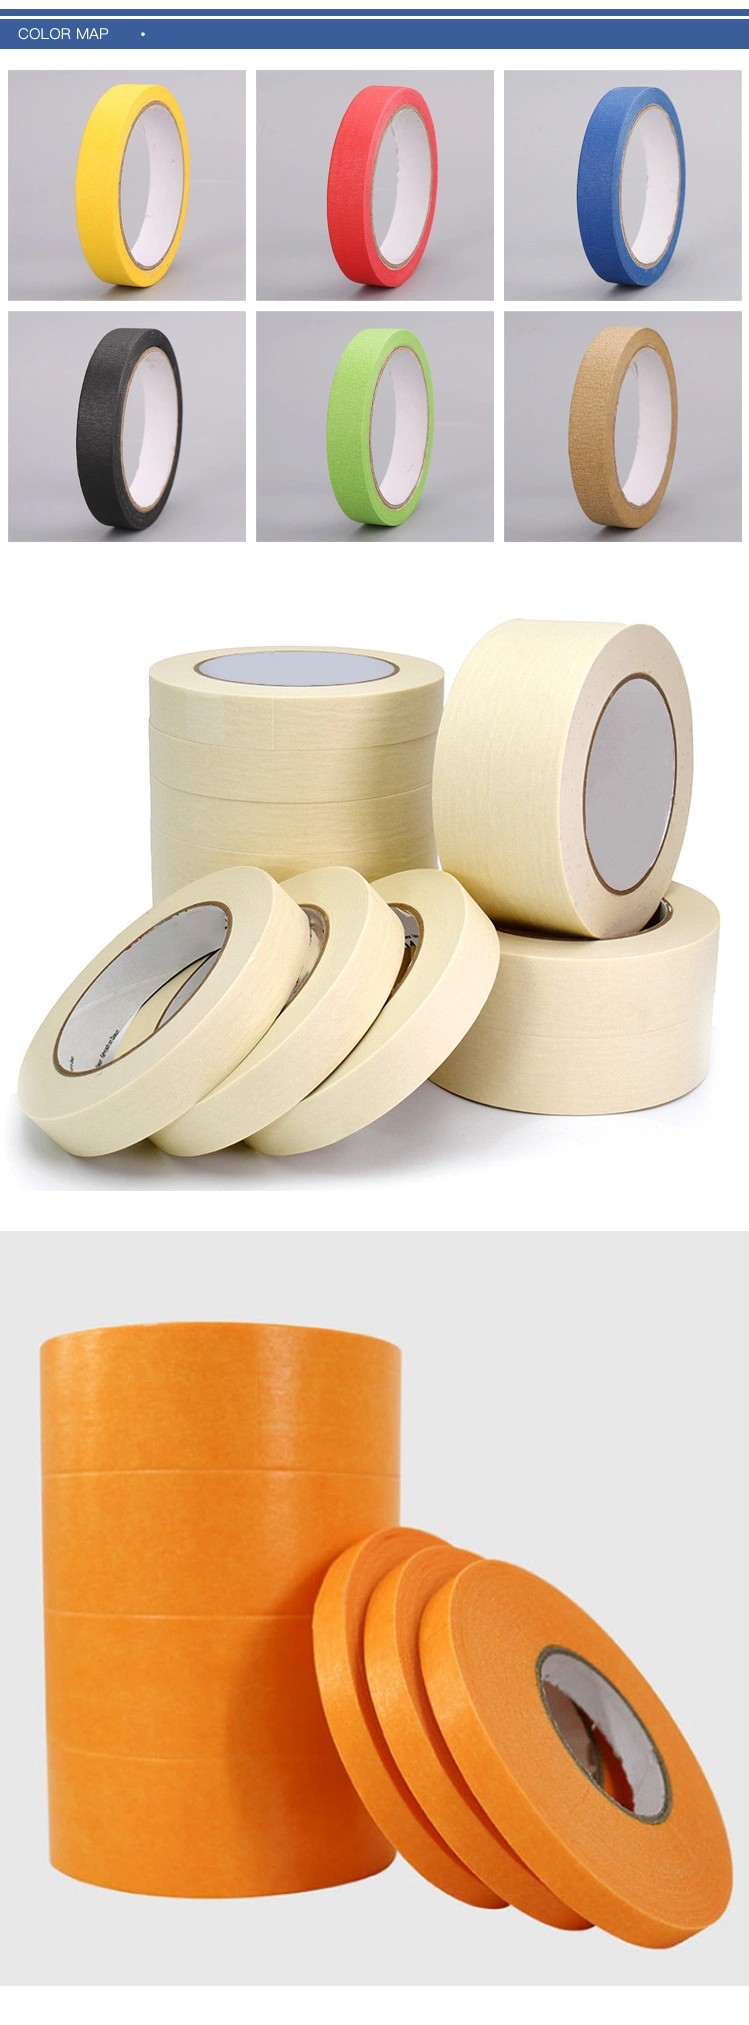 Pre Masking Tape Pre Cut Heat Resistant Crepe Paper Replace Paint Protection Masking Tape Automotive Price Manufacturer